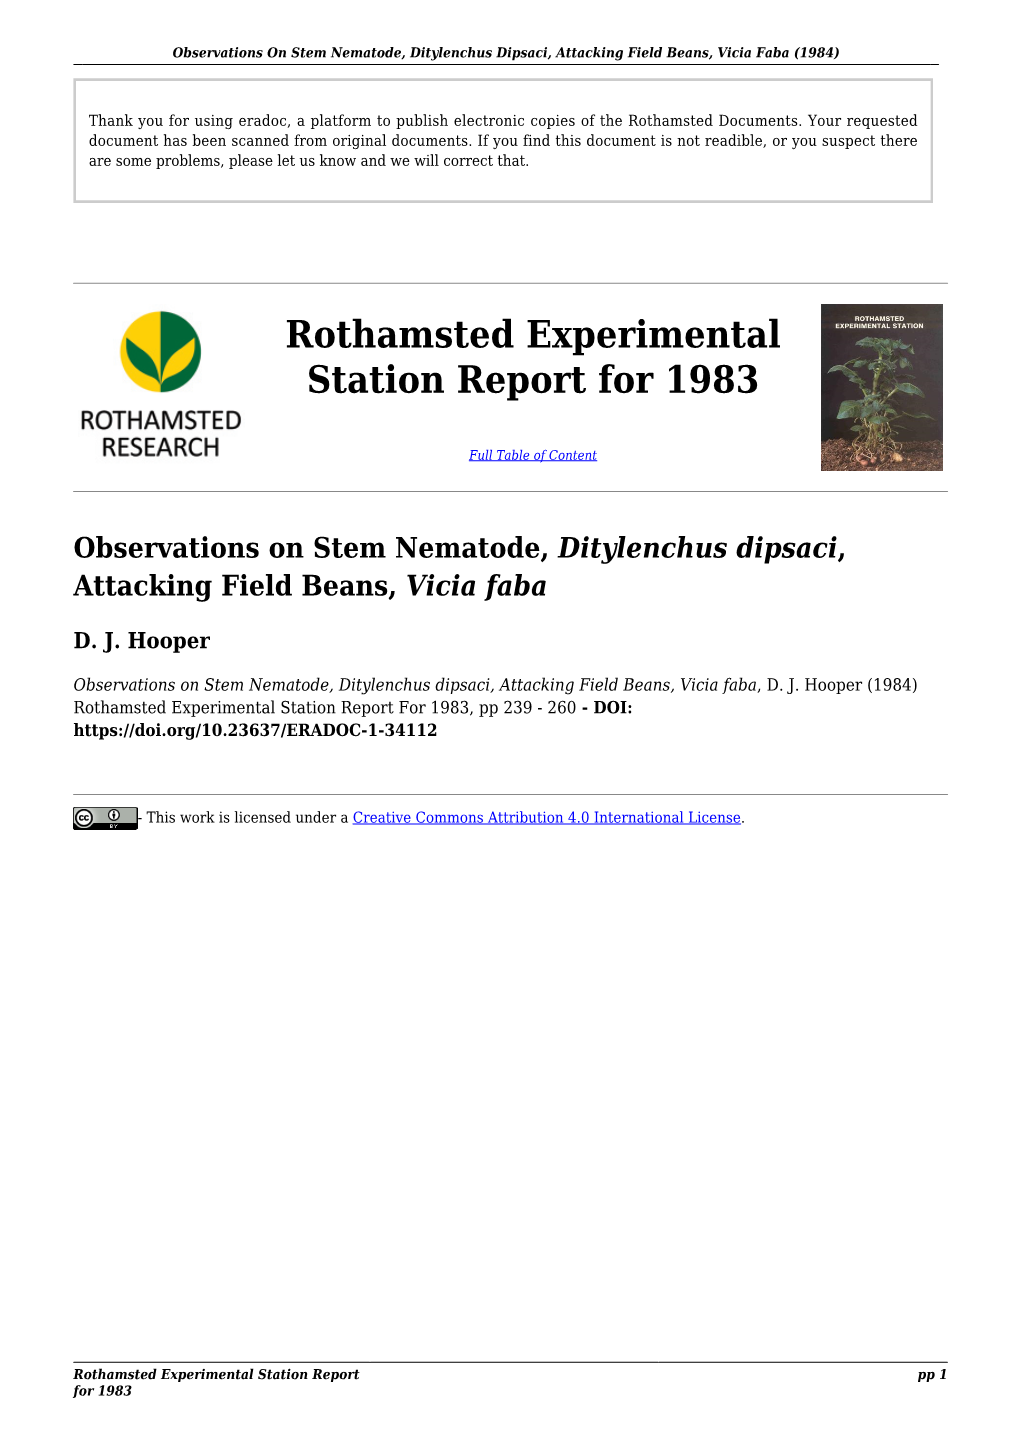 Rothamsted Experimental Station Report for 1983